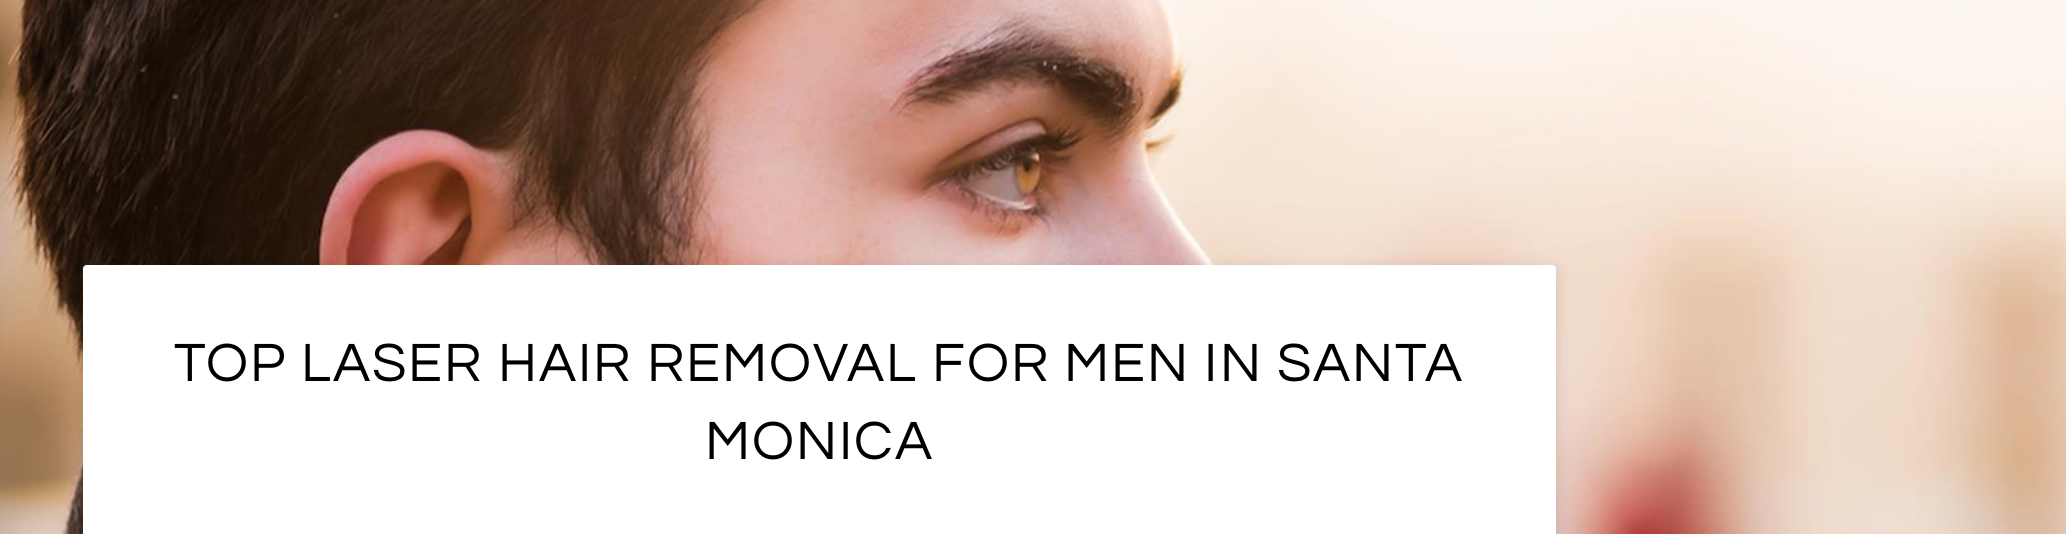 Laser hair removal for men in Santa Monica on Montana Avenue at Kare Plastic Surgery